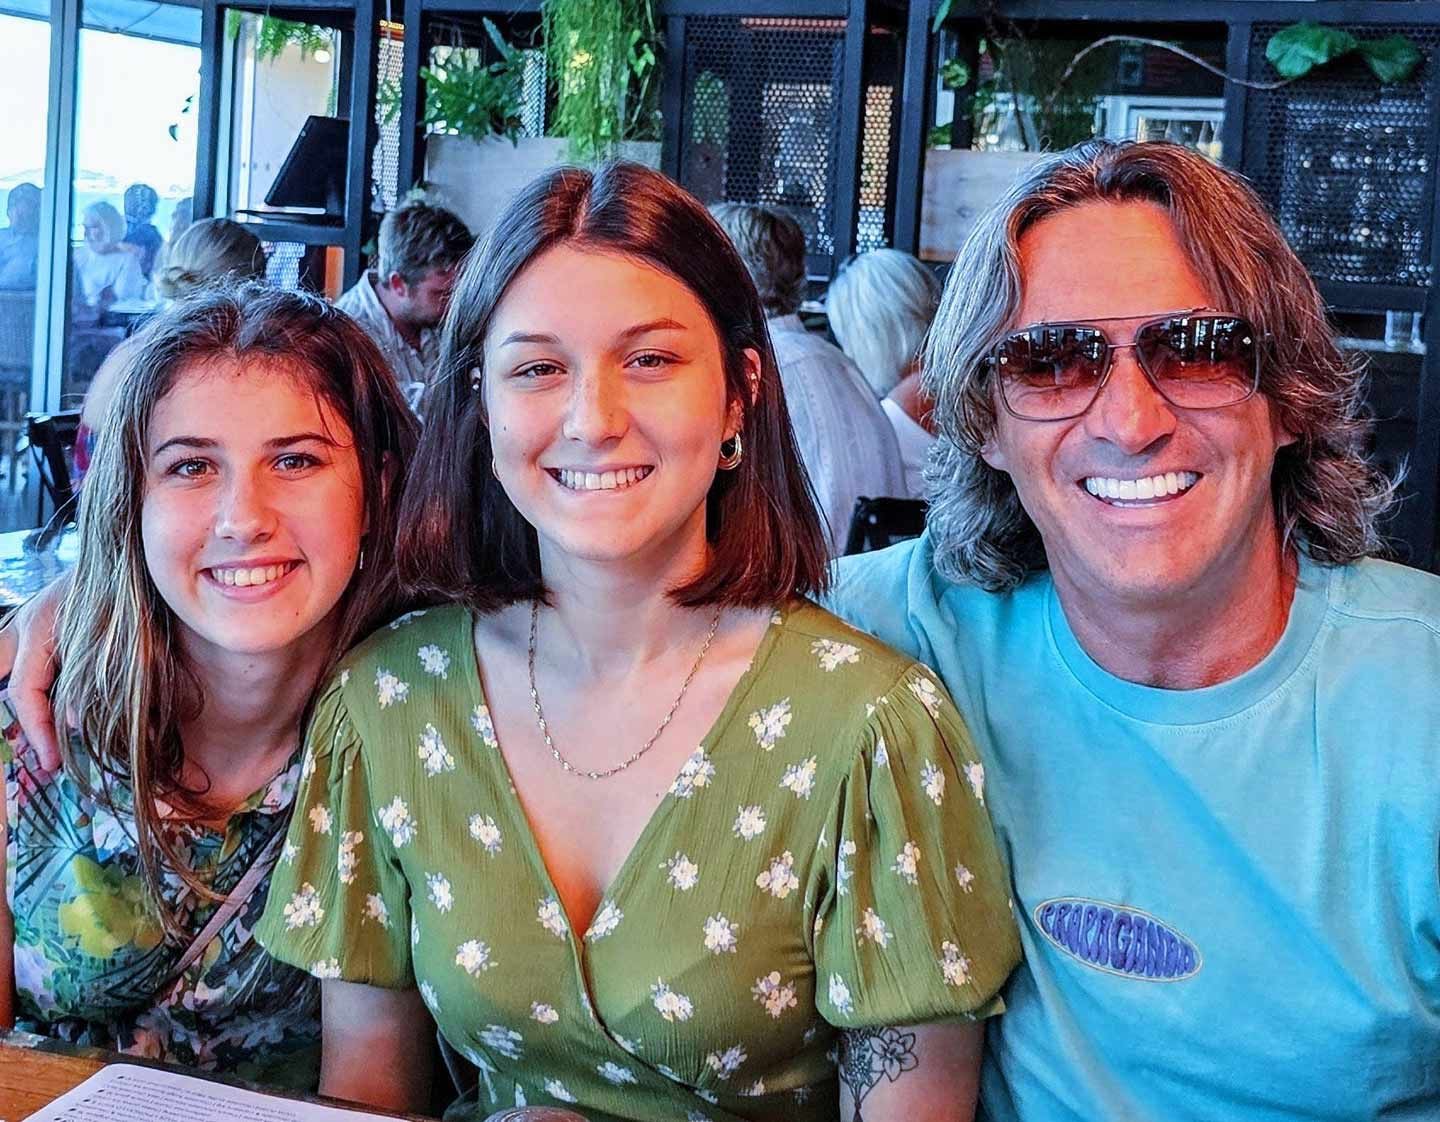 With my daughters Emily (20) and Jessica (17). They are my life.